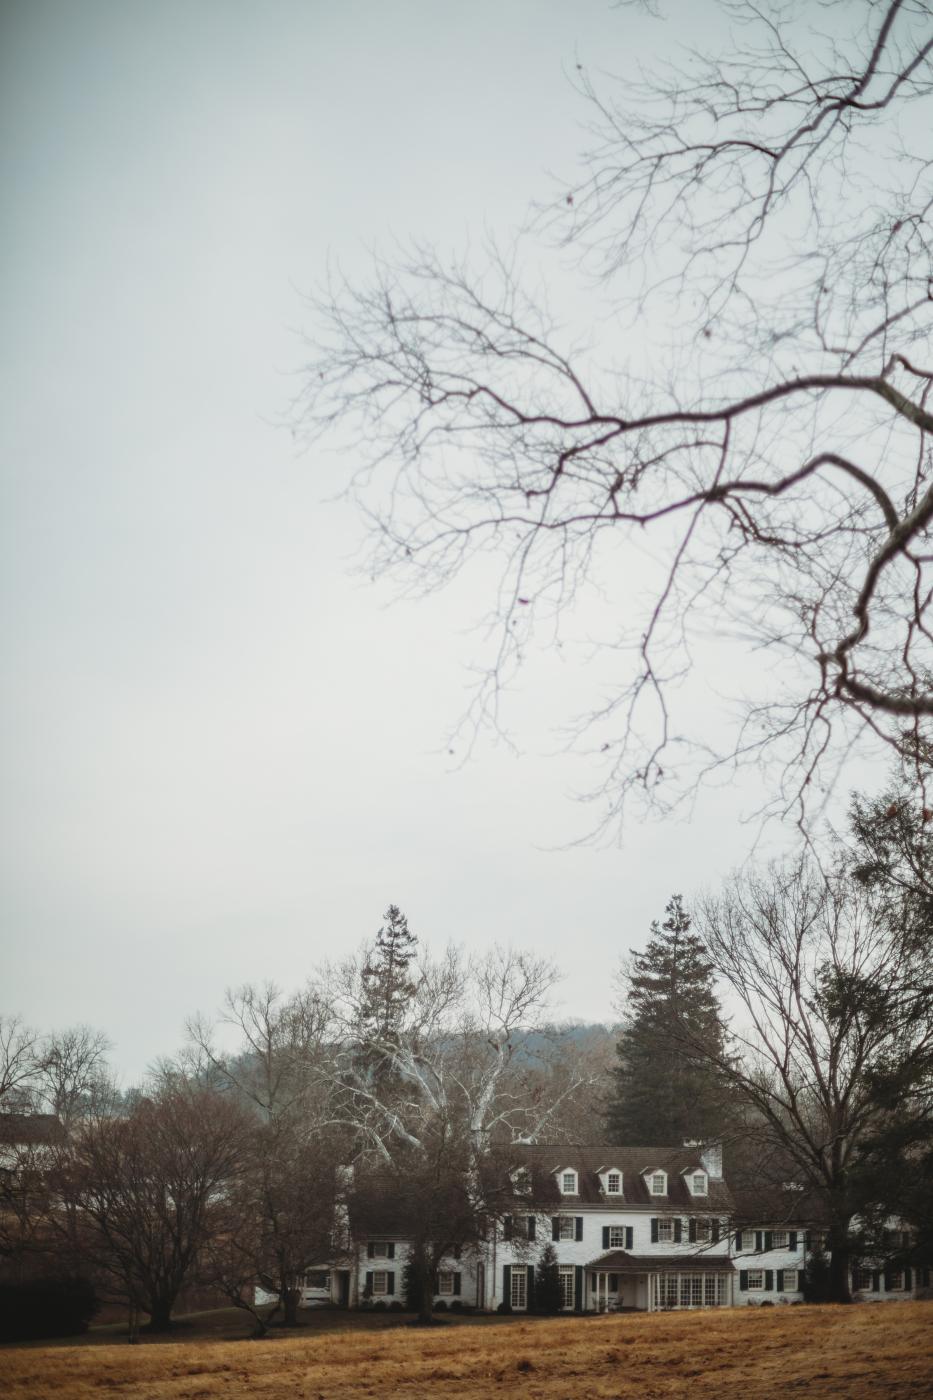 Philander Chase Knox Estate in winter | Buy this image